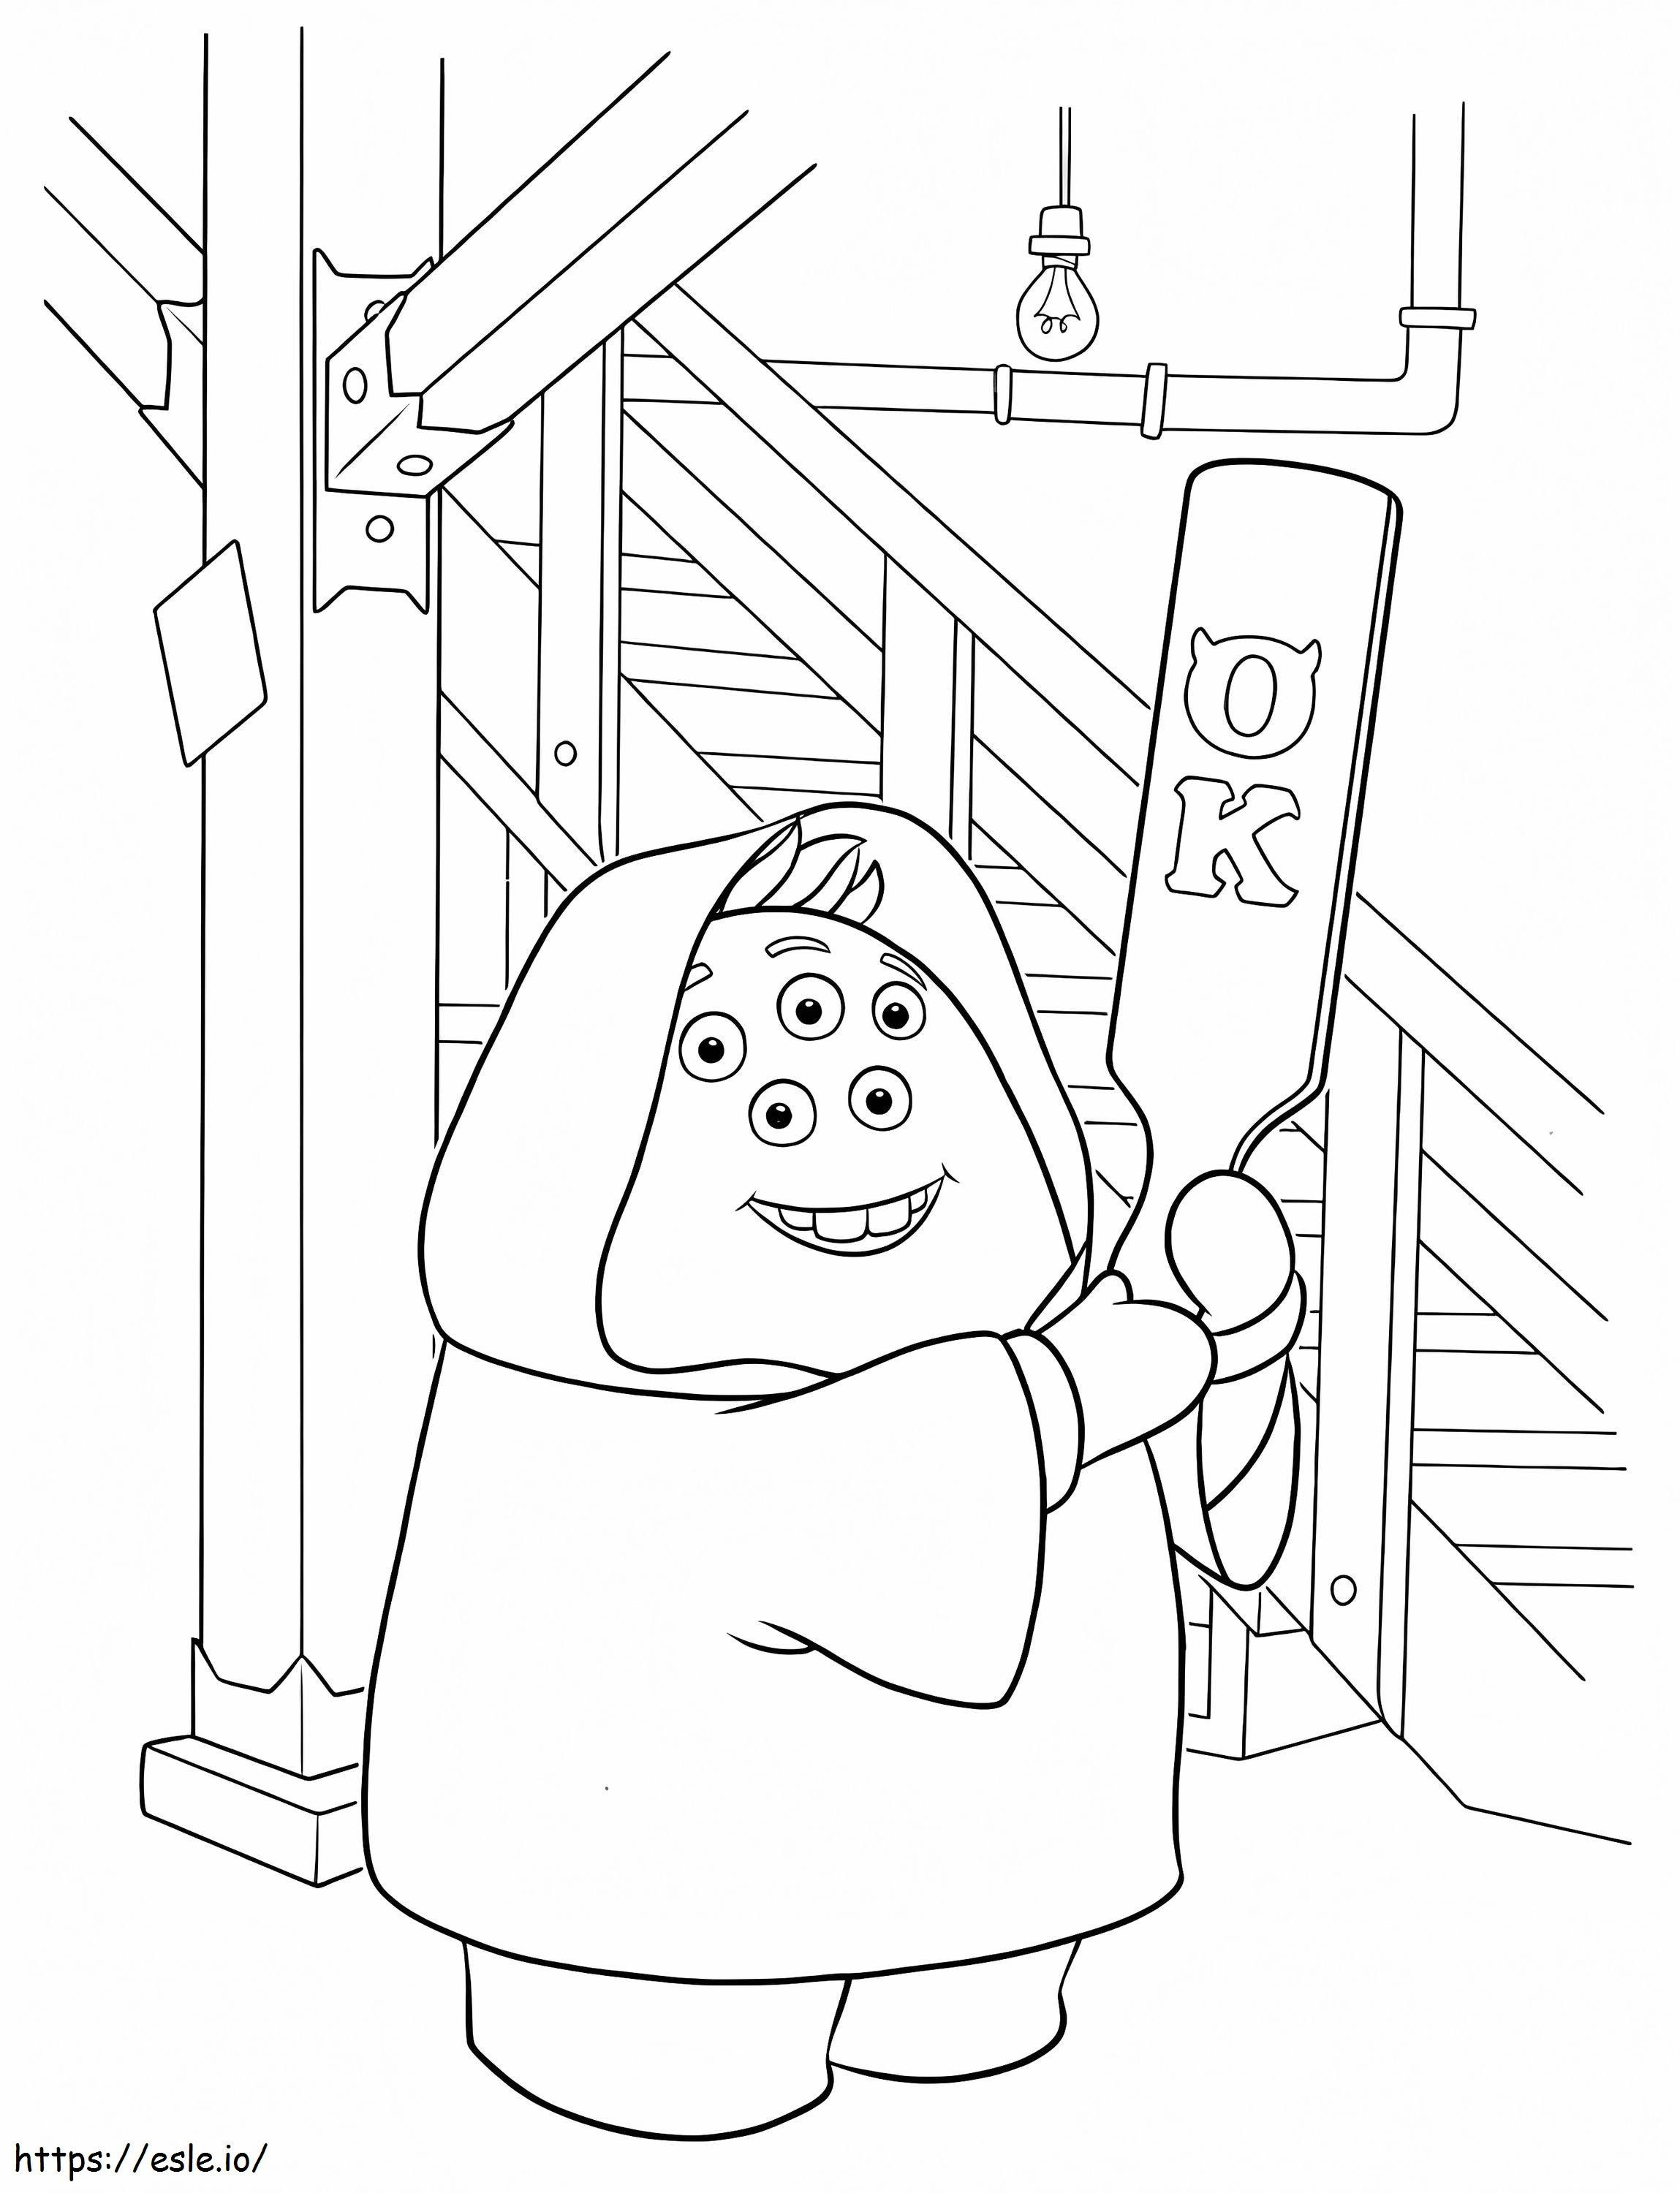 Scott Squibbles From Monsters University coloring page